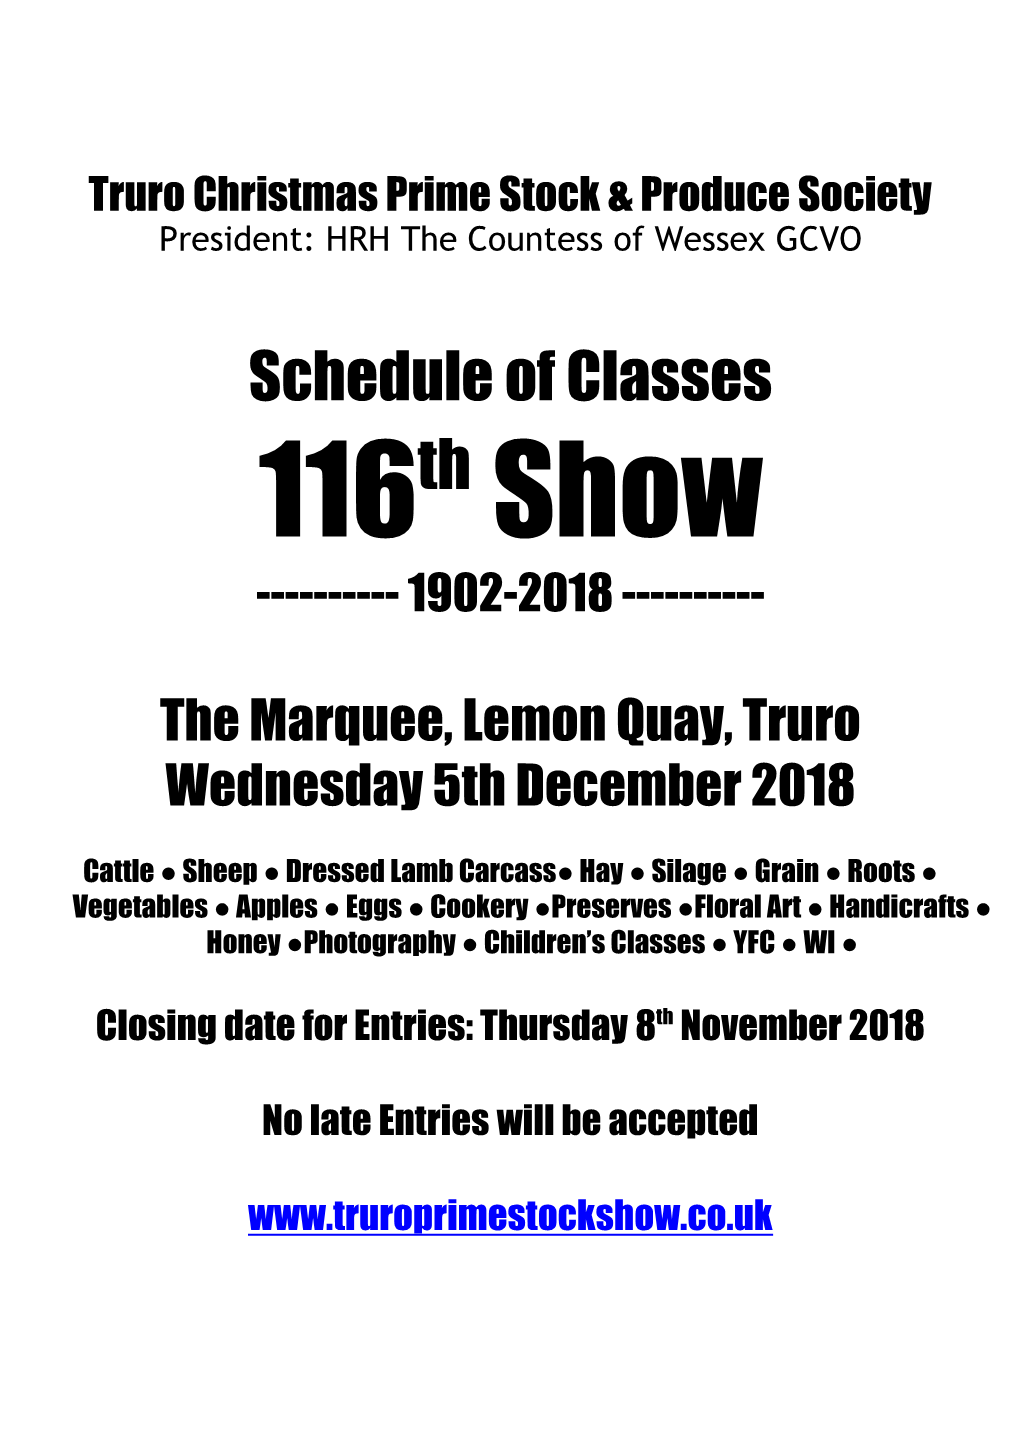 Truro Christmas Prime Stock & Produce Society President: HRH the Countess of Wessex GCVO